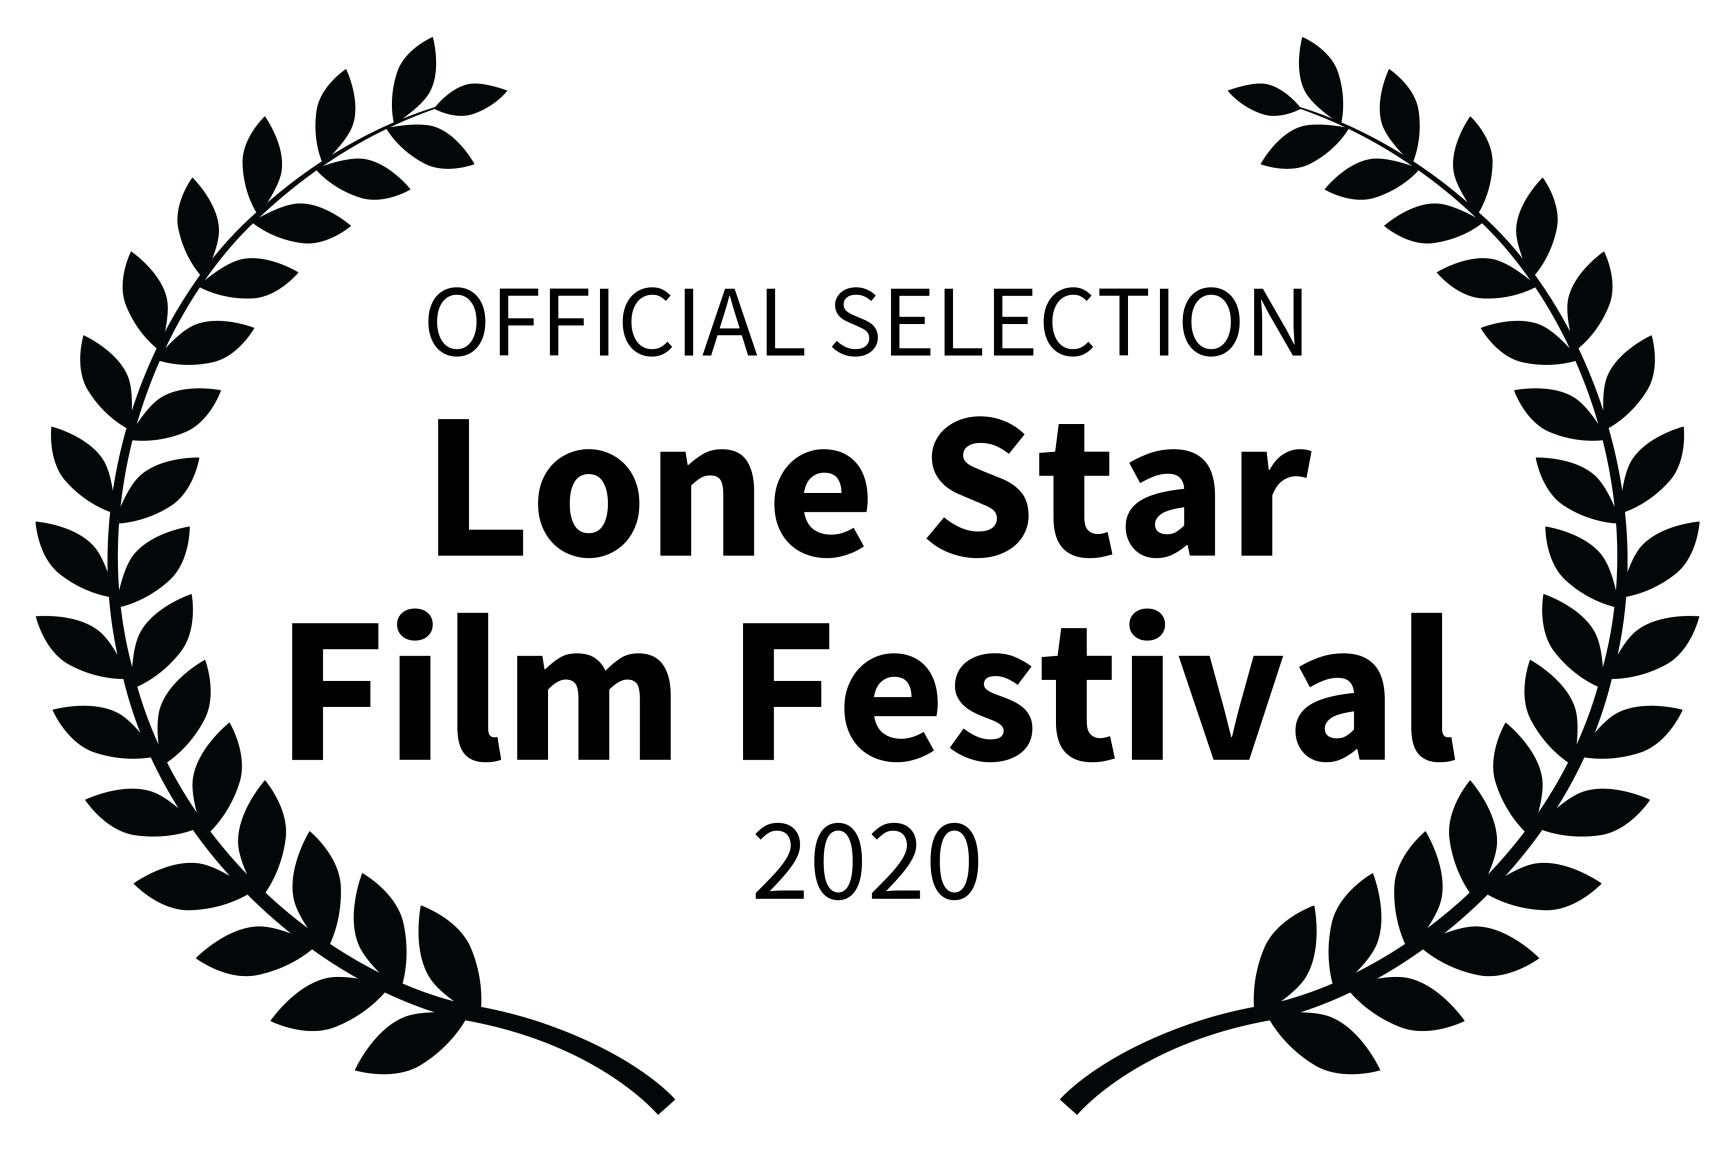 Official selection of the Lone Star Film Festival - 2020